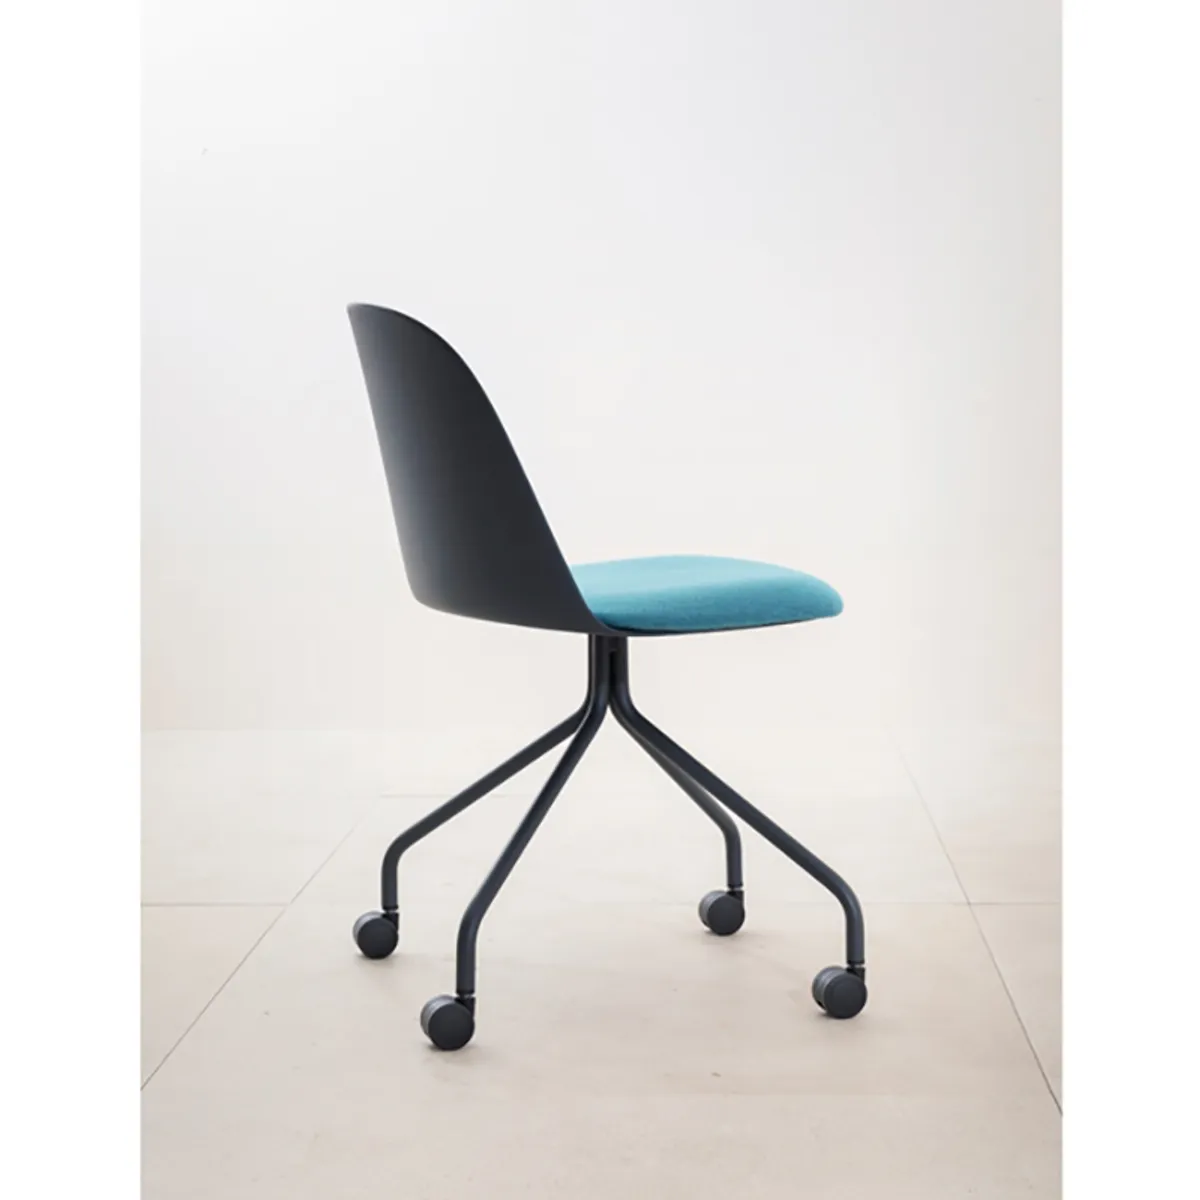 Mariolina Office Chair For Coworking Enviromnents And University Libraries 124